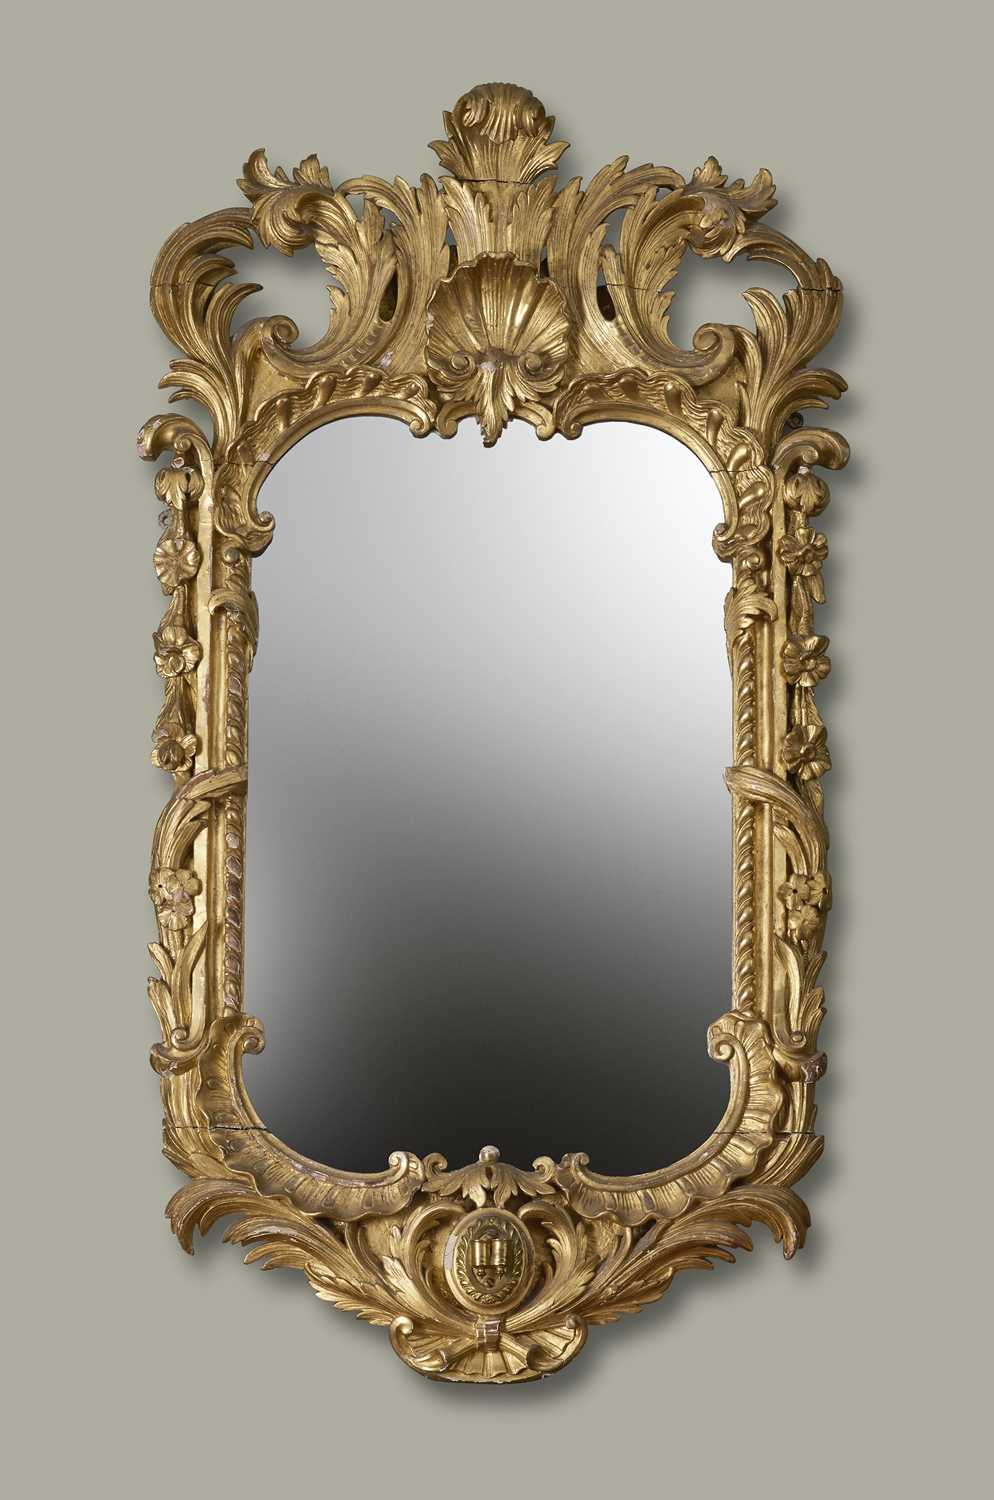 A GEORGE II SCOTTISH GILTWOOD GIRANDOLE WALL MIRROR C.1755 the later plate within a frame carved